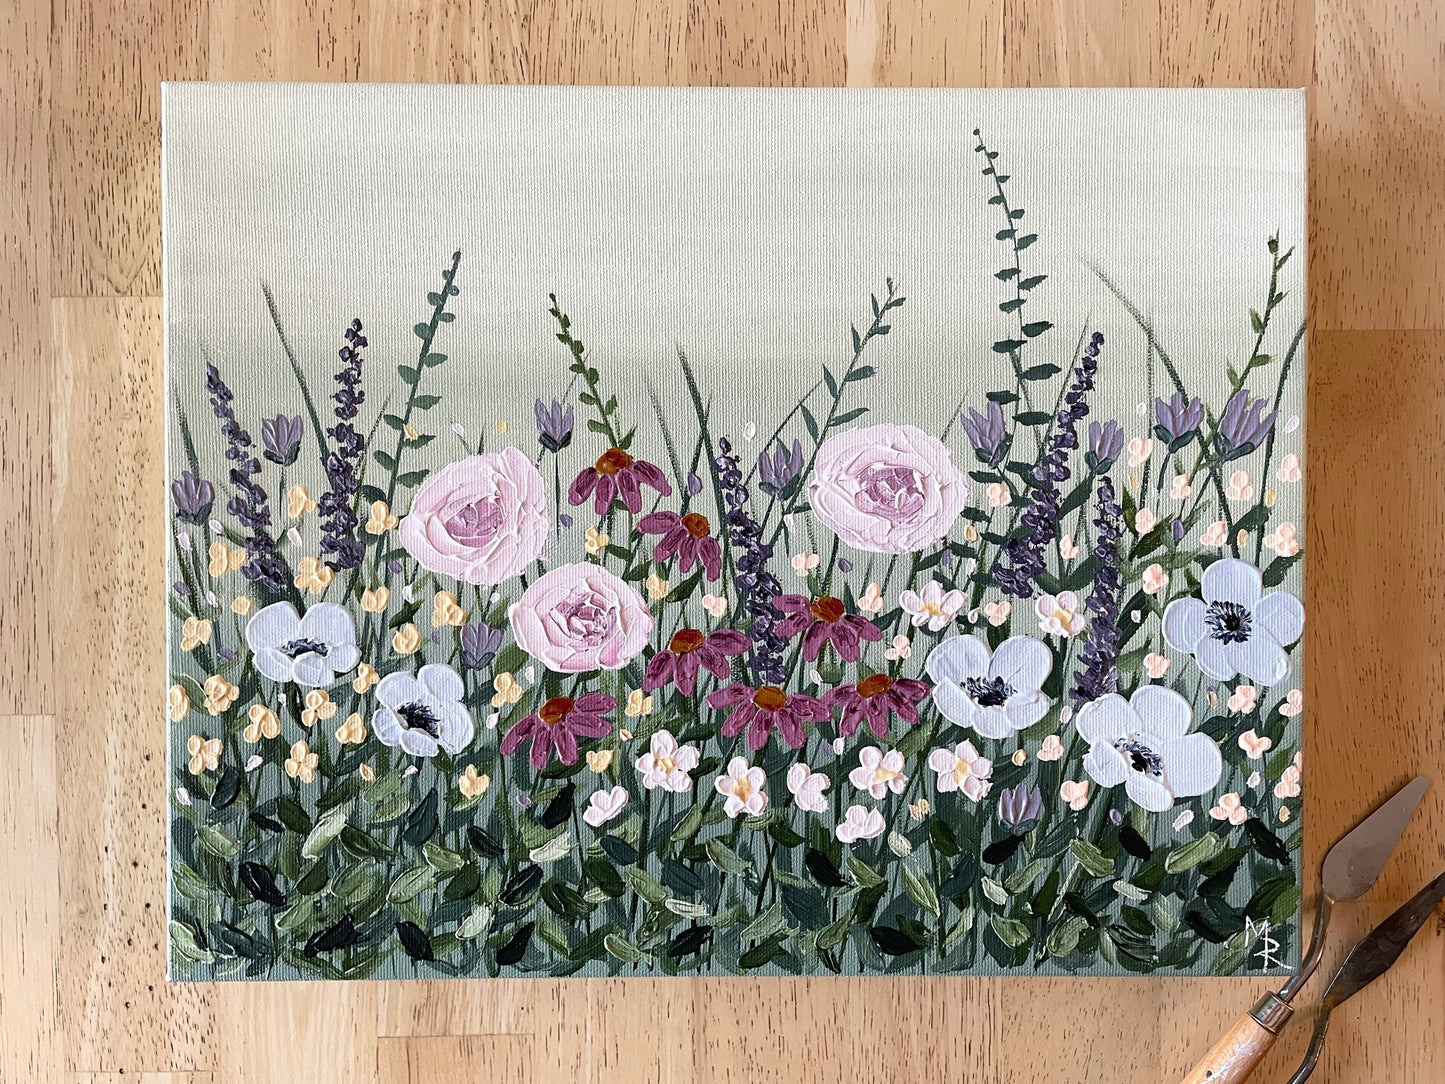 "Spring Blooms" acrylic painting